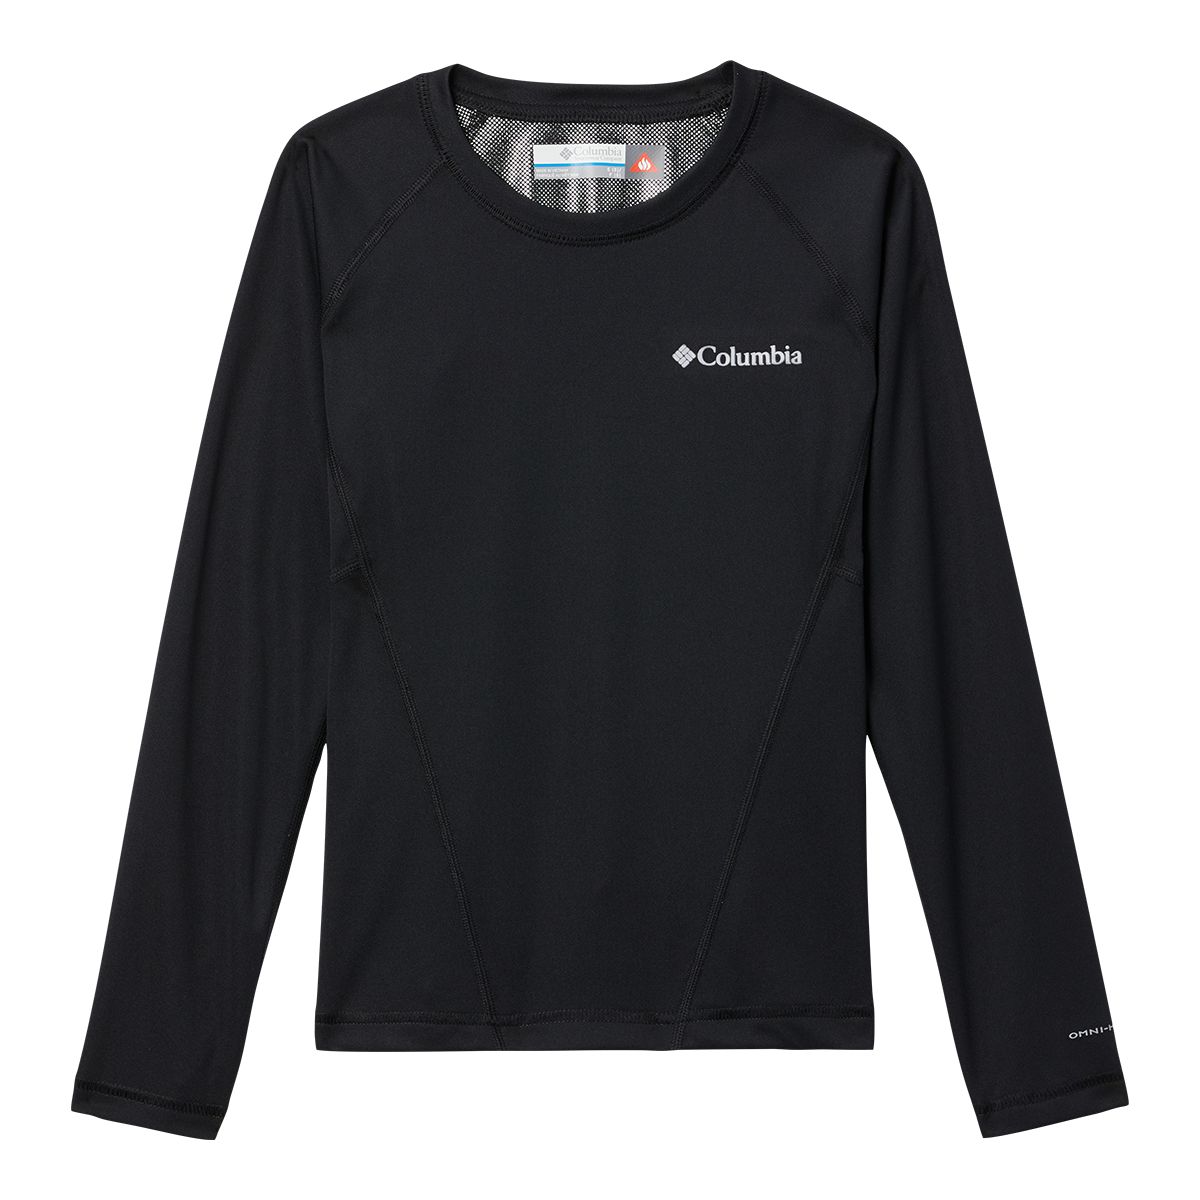 Image of Columbia Youth Mdwt Baselayer Crew Top